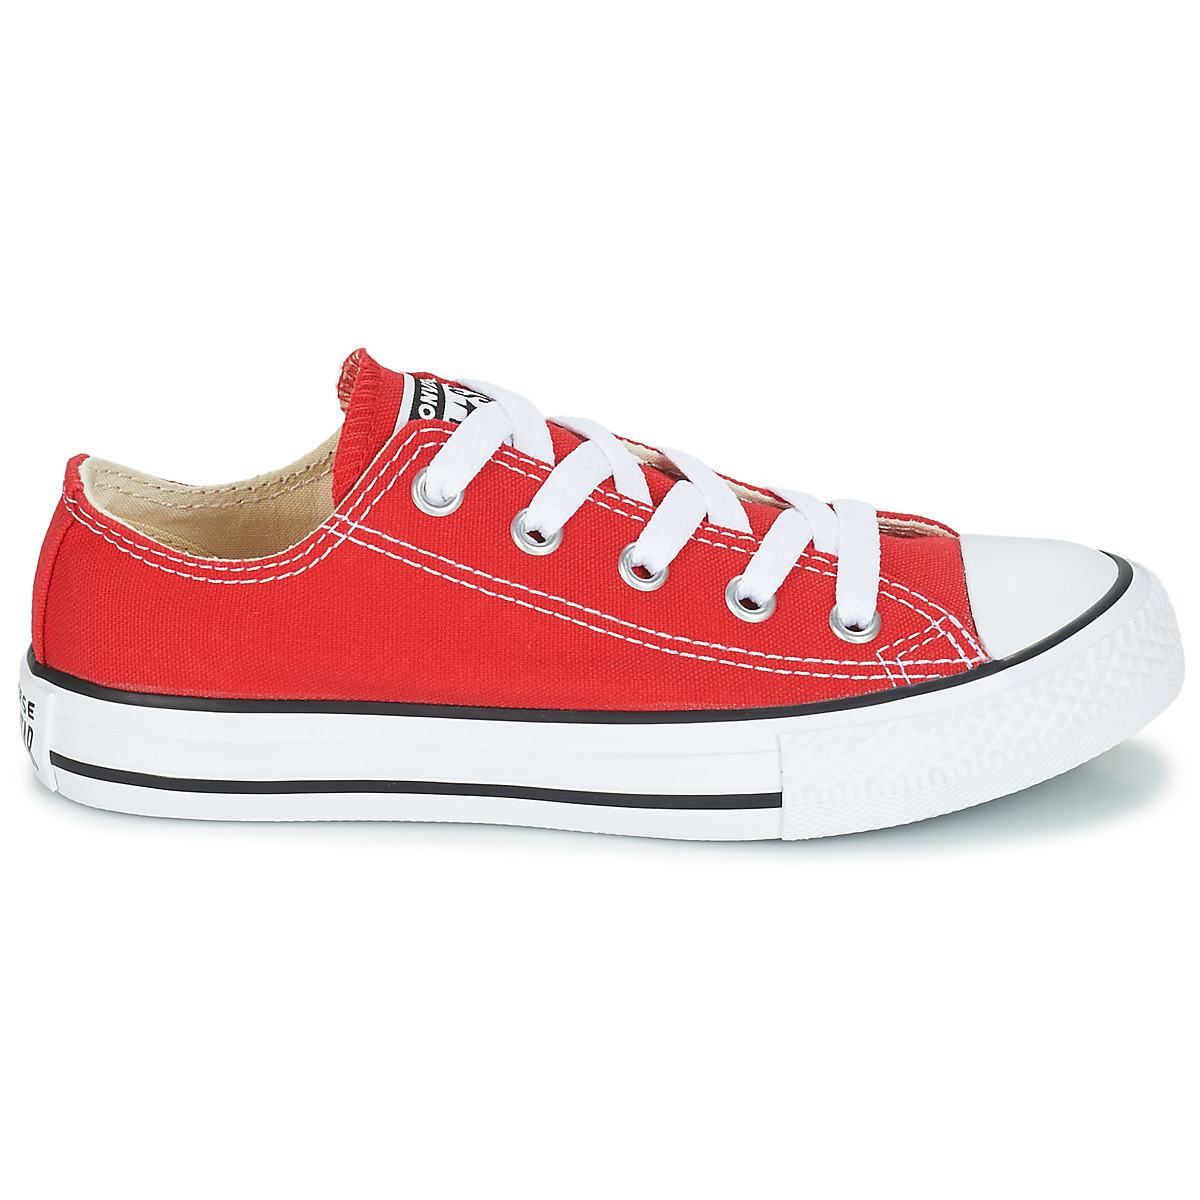 Converse Rouge CHUCK TAYLOR ALL STAR CORE OX pHKwzWpM